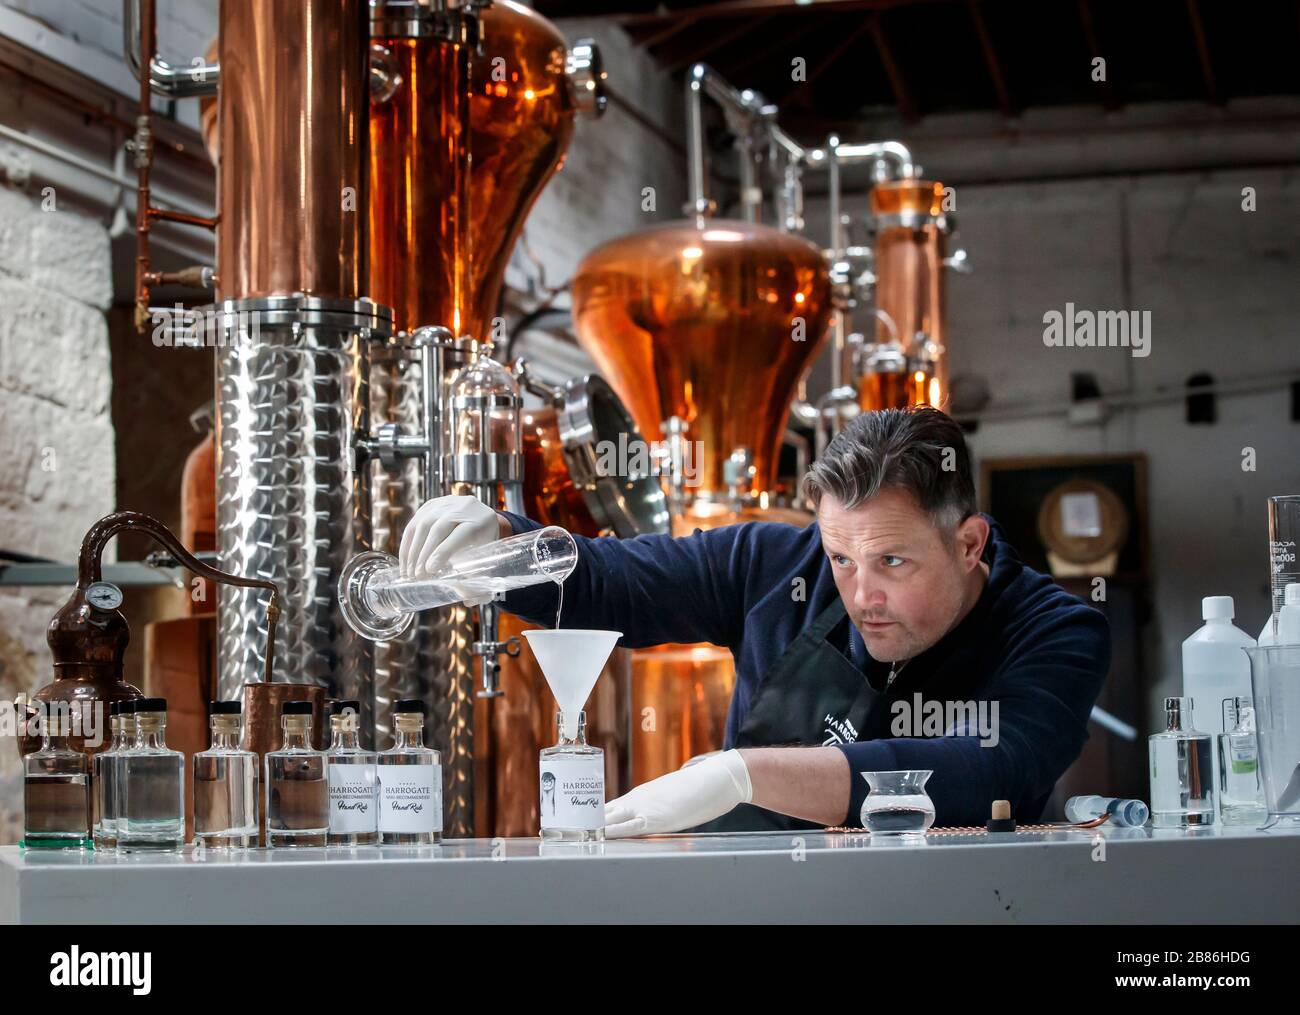 Steven Green, founder of Harrogate Tipple, makes hand sanitiser at his gin distillery in North Yorkshire, as his company starts to produce sanitiser in line with World Health Organisation recommendations to boost supply amid the coronavirus crisis. Stock Photo